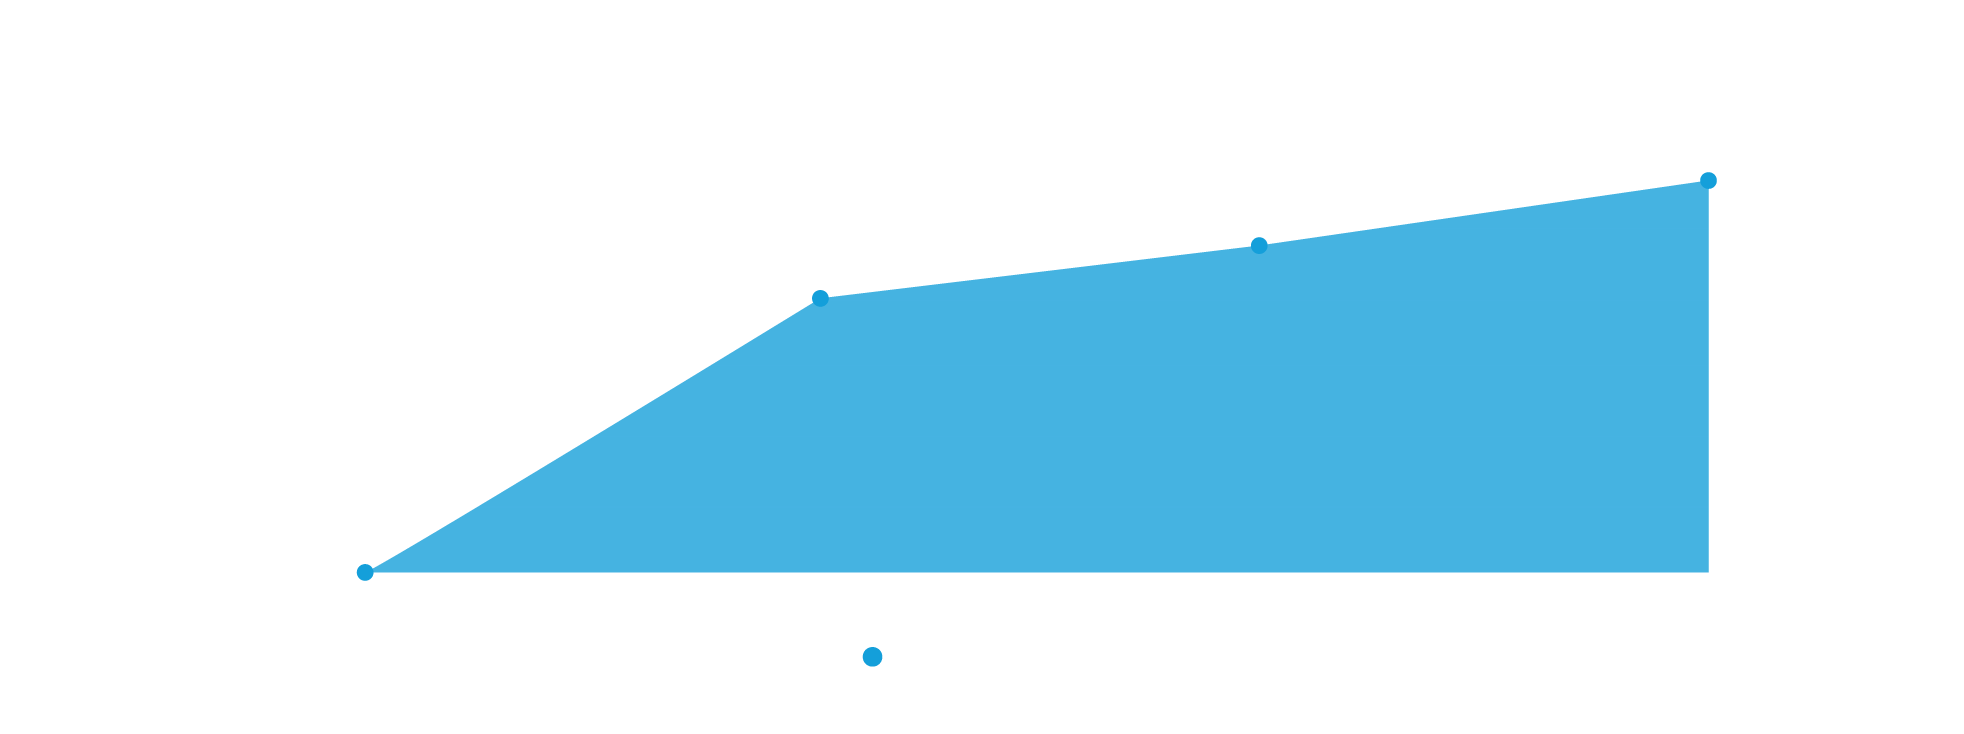 Fawry Cumulative Funding Raised Over Time